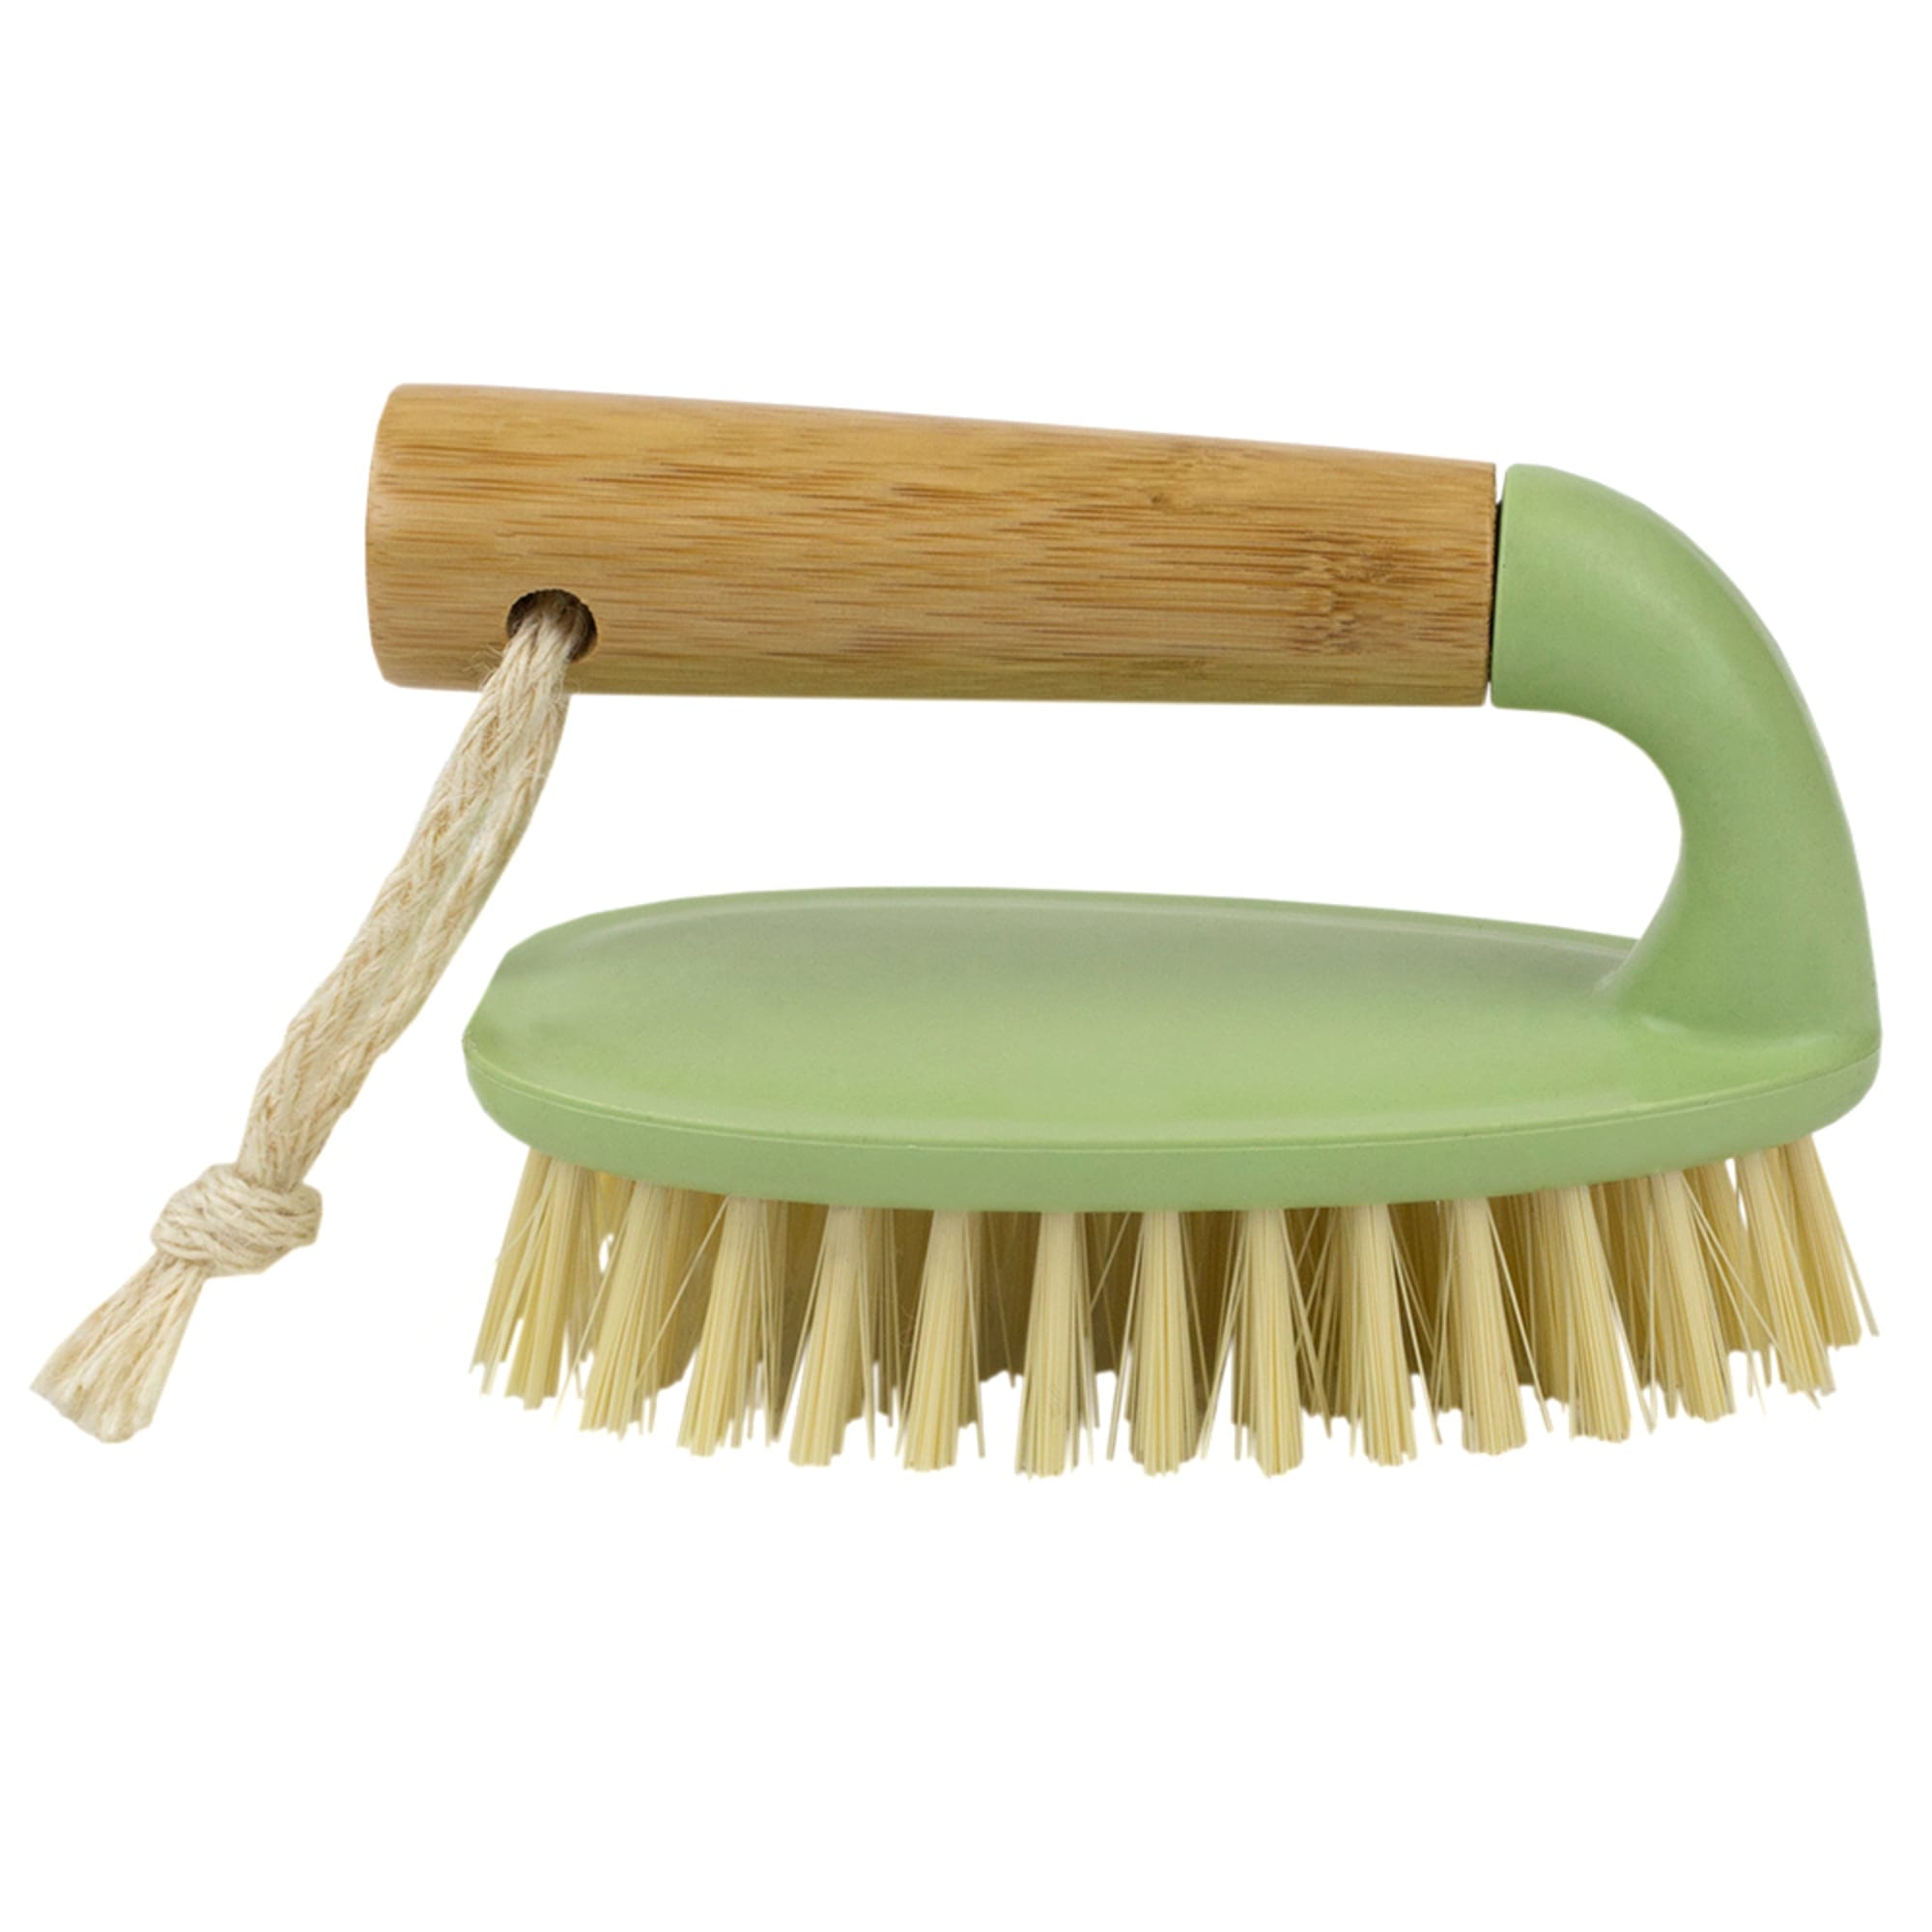 Home Basics Bliss Collection Bamboo Scrubbing Brush, Green $3 EACH, CASE PACK OF 12